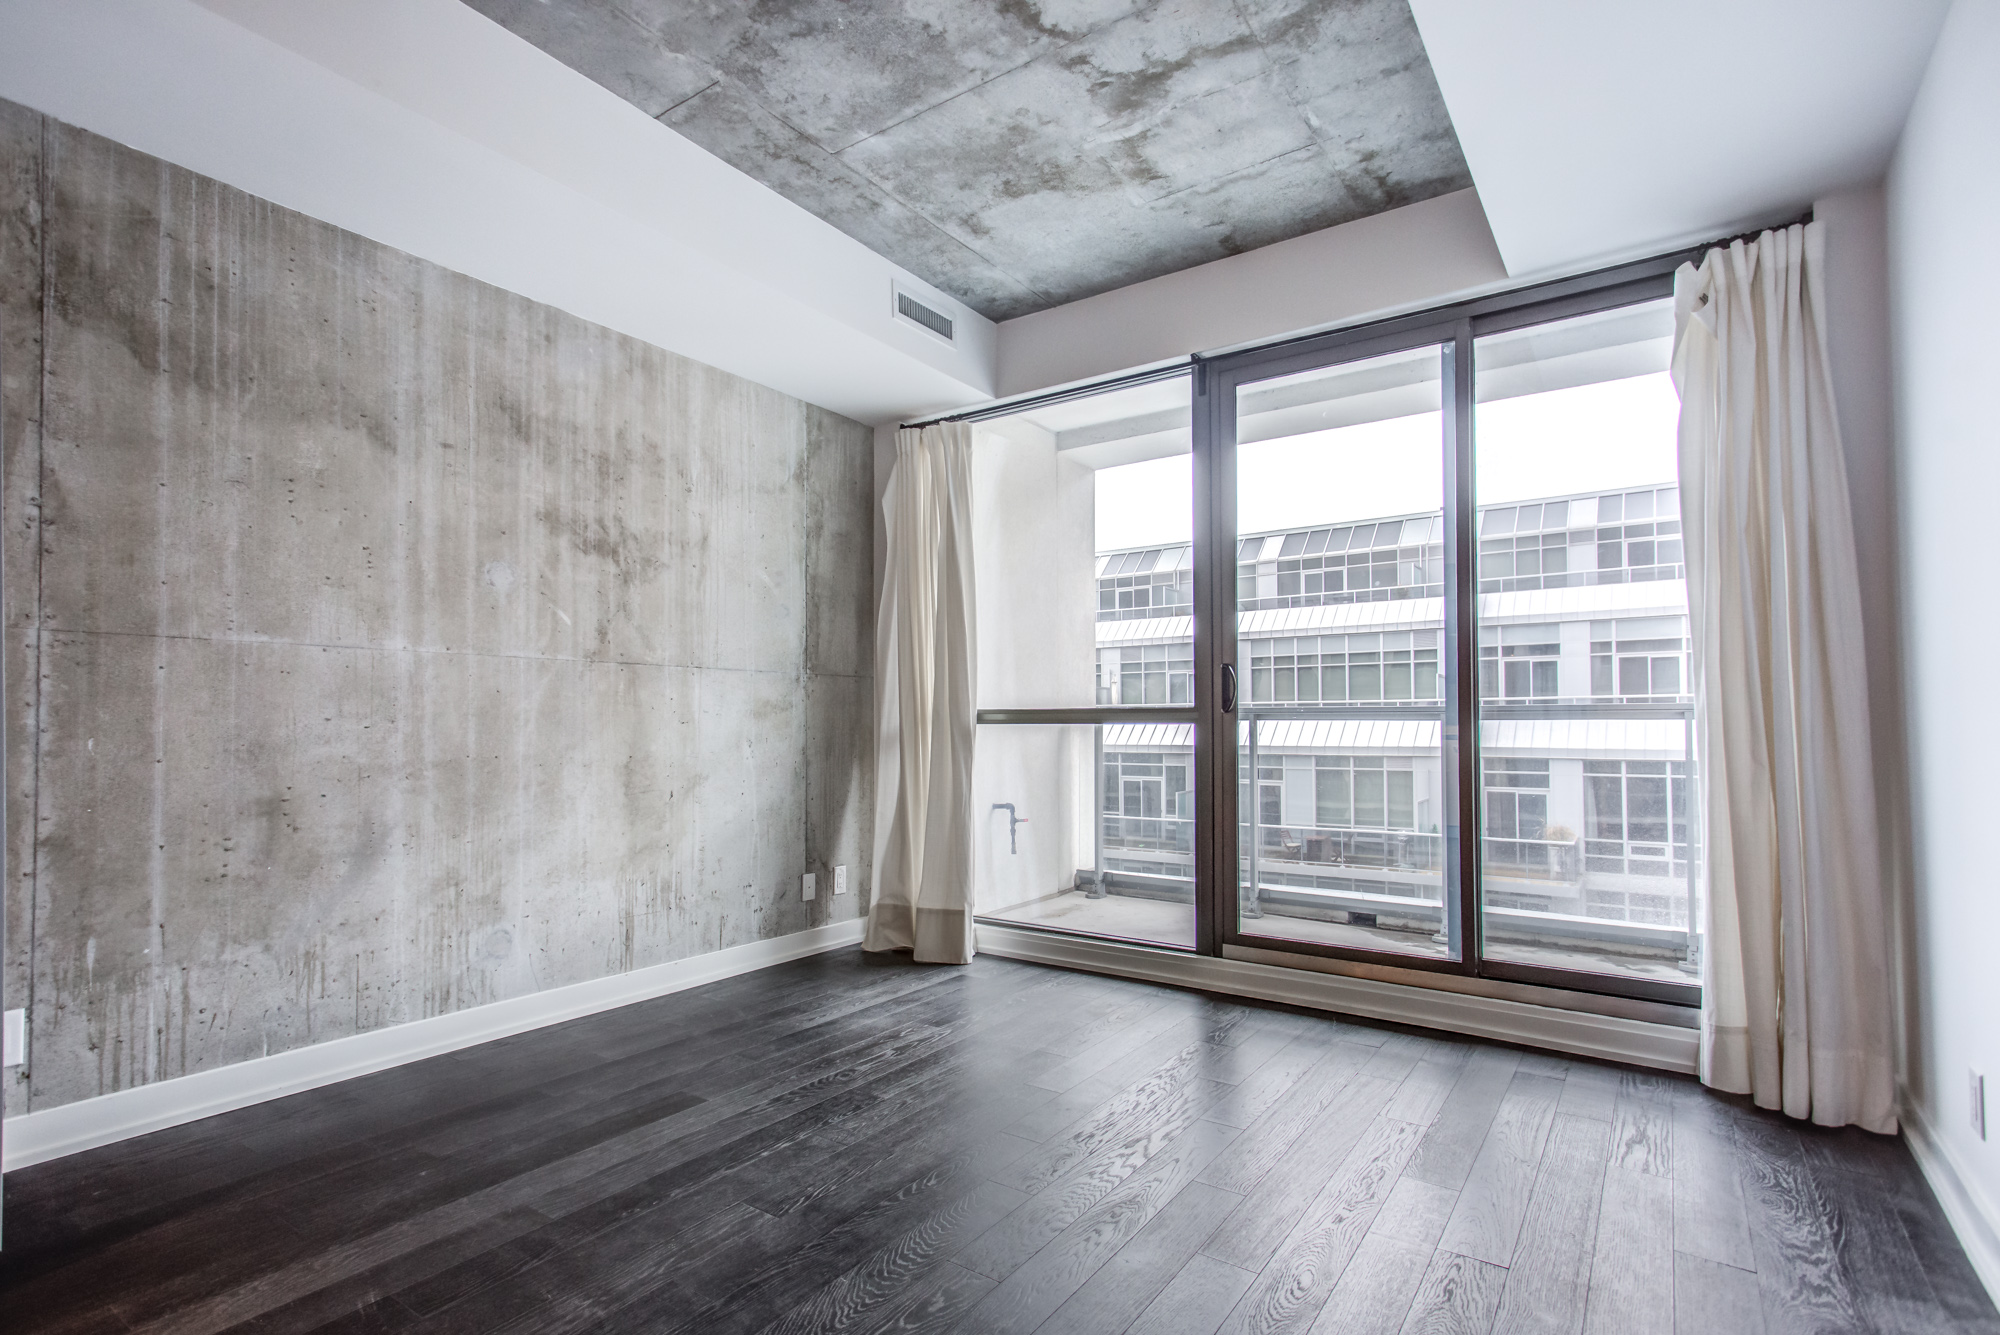 39 Brant St Unit 918, Brant Park Lofts, in Queen West with huge windows and exposed concrete wall and ceiling.